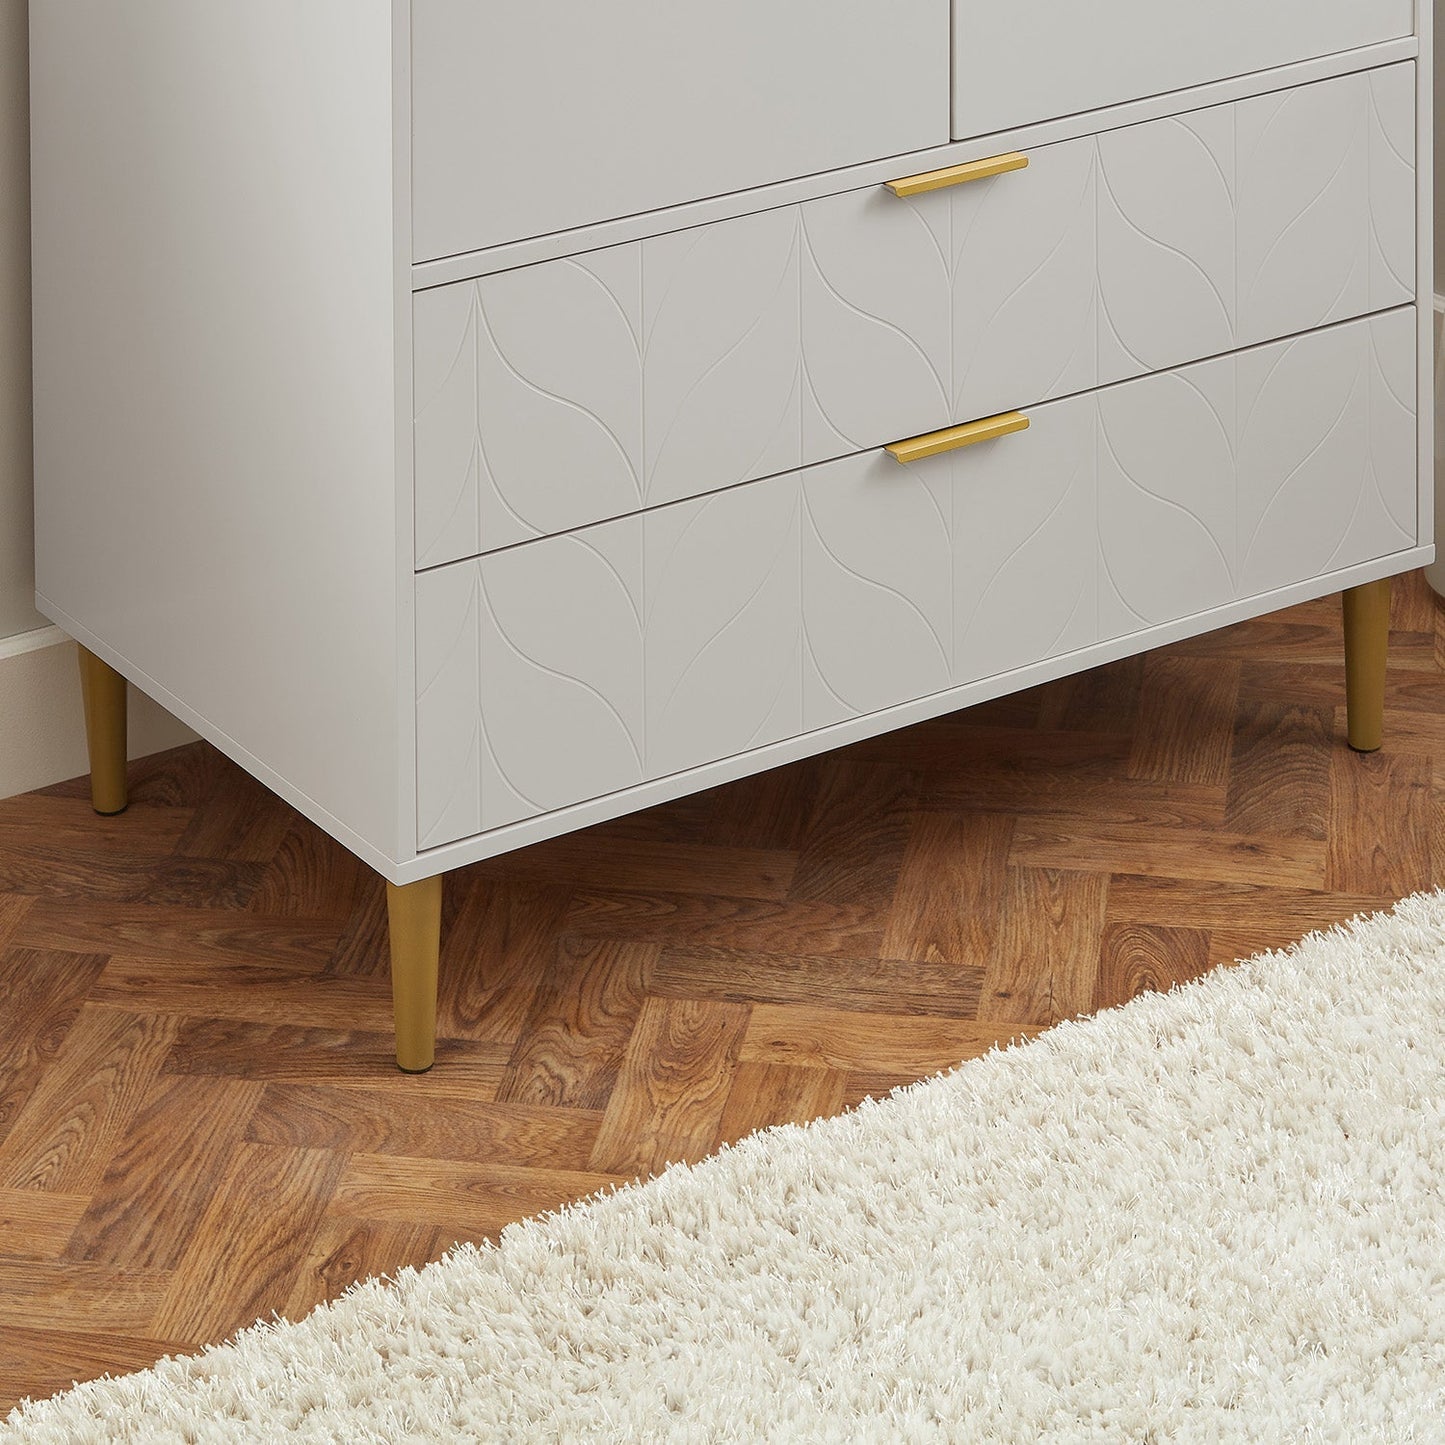 Gloria wardrobe and drawers set -3 drawer chest of drawers - grey - Laura James